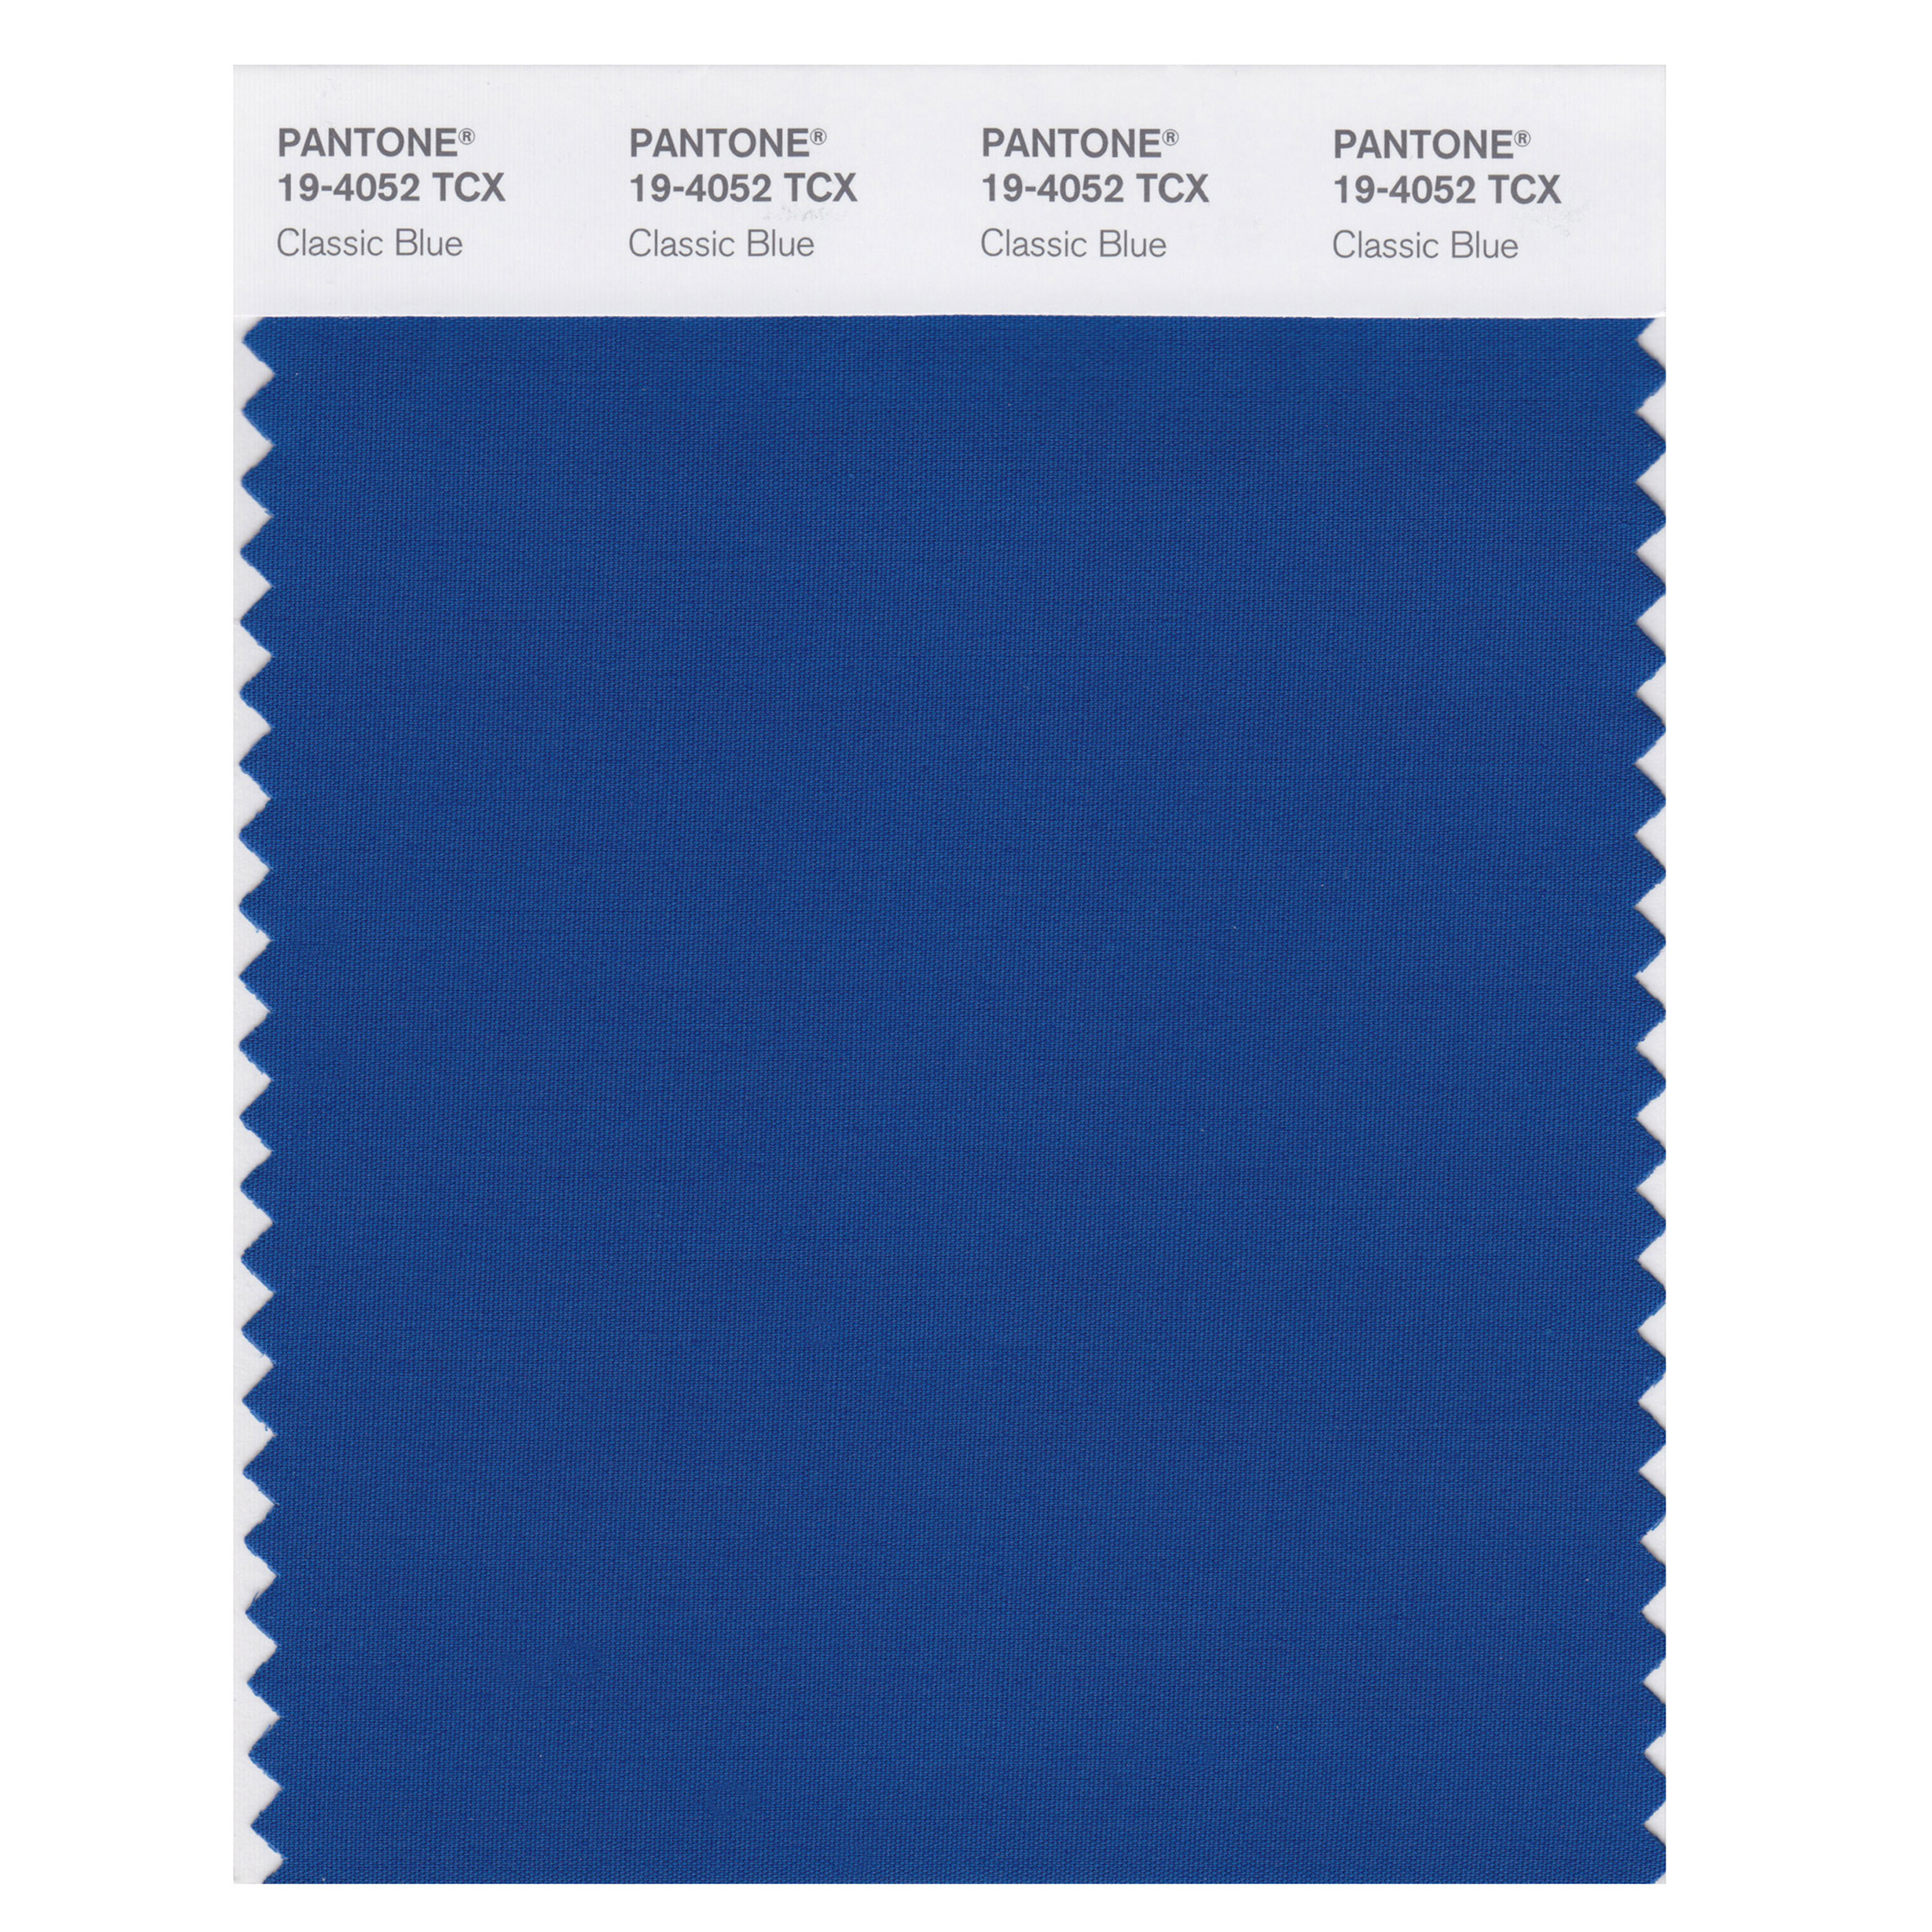 Classic Blue and Beyond for your Bathroom with Pantone's Color of the